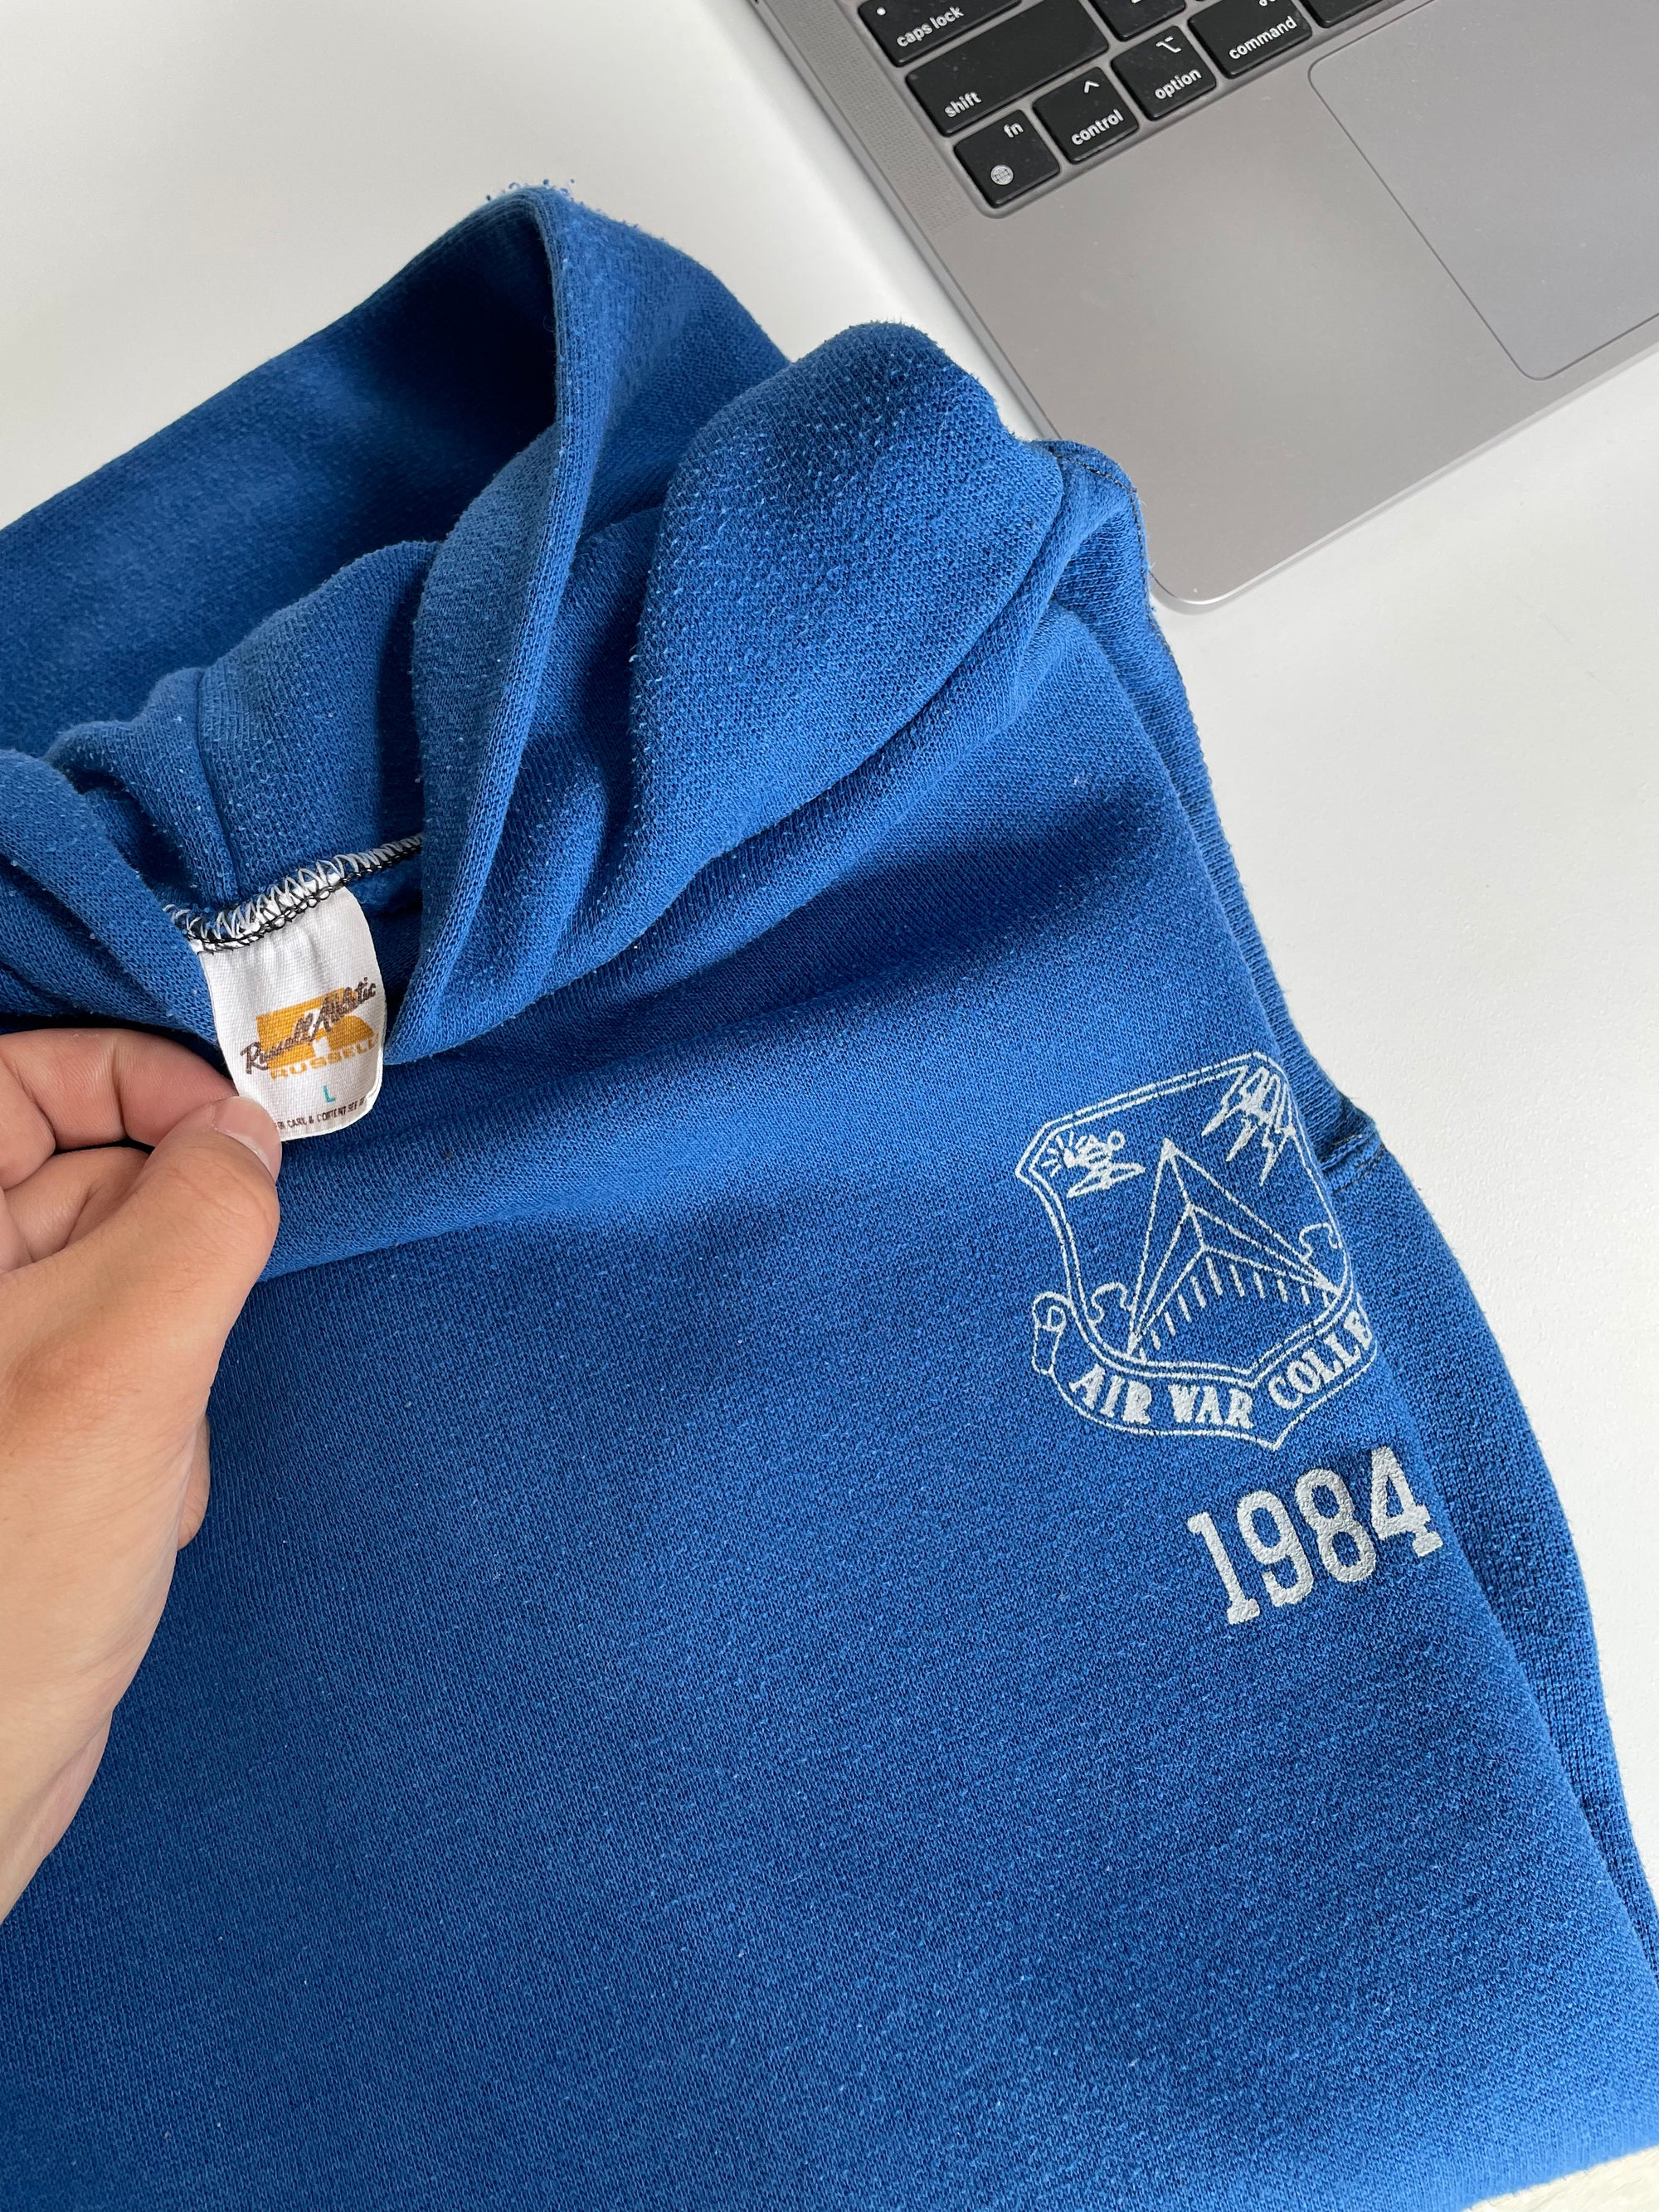 1970s/80s Russell “Air War College” Hoodie (M/L)